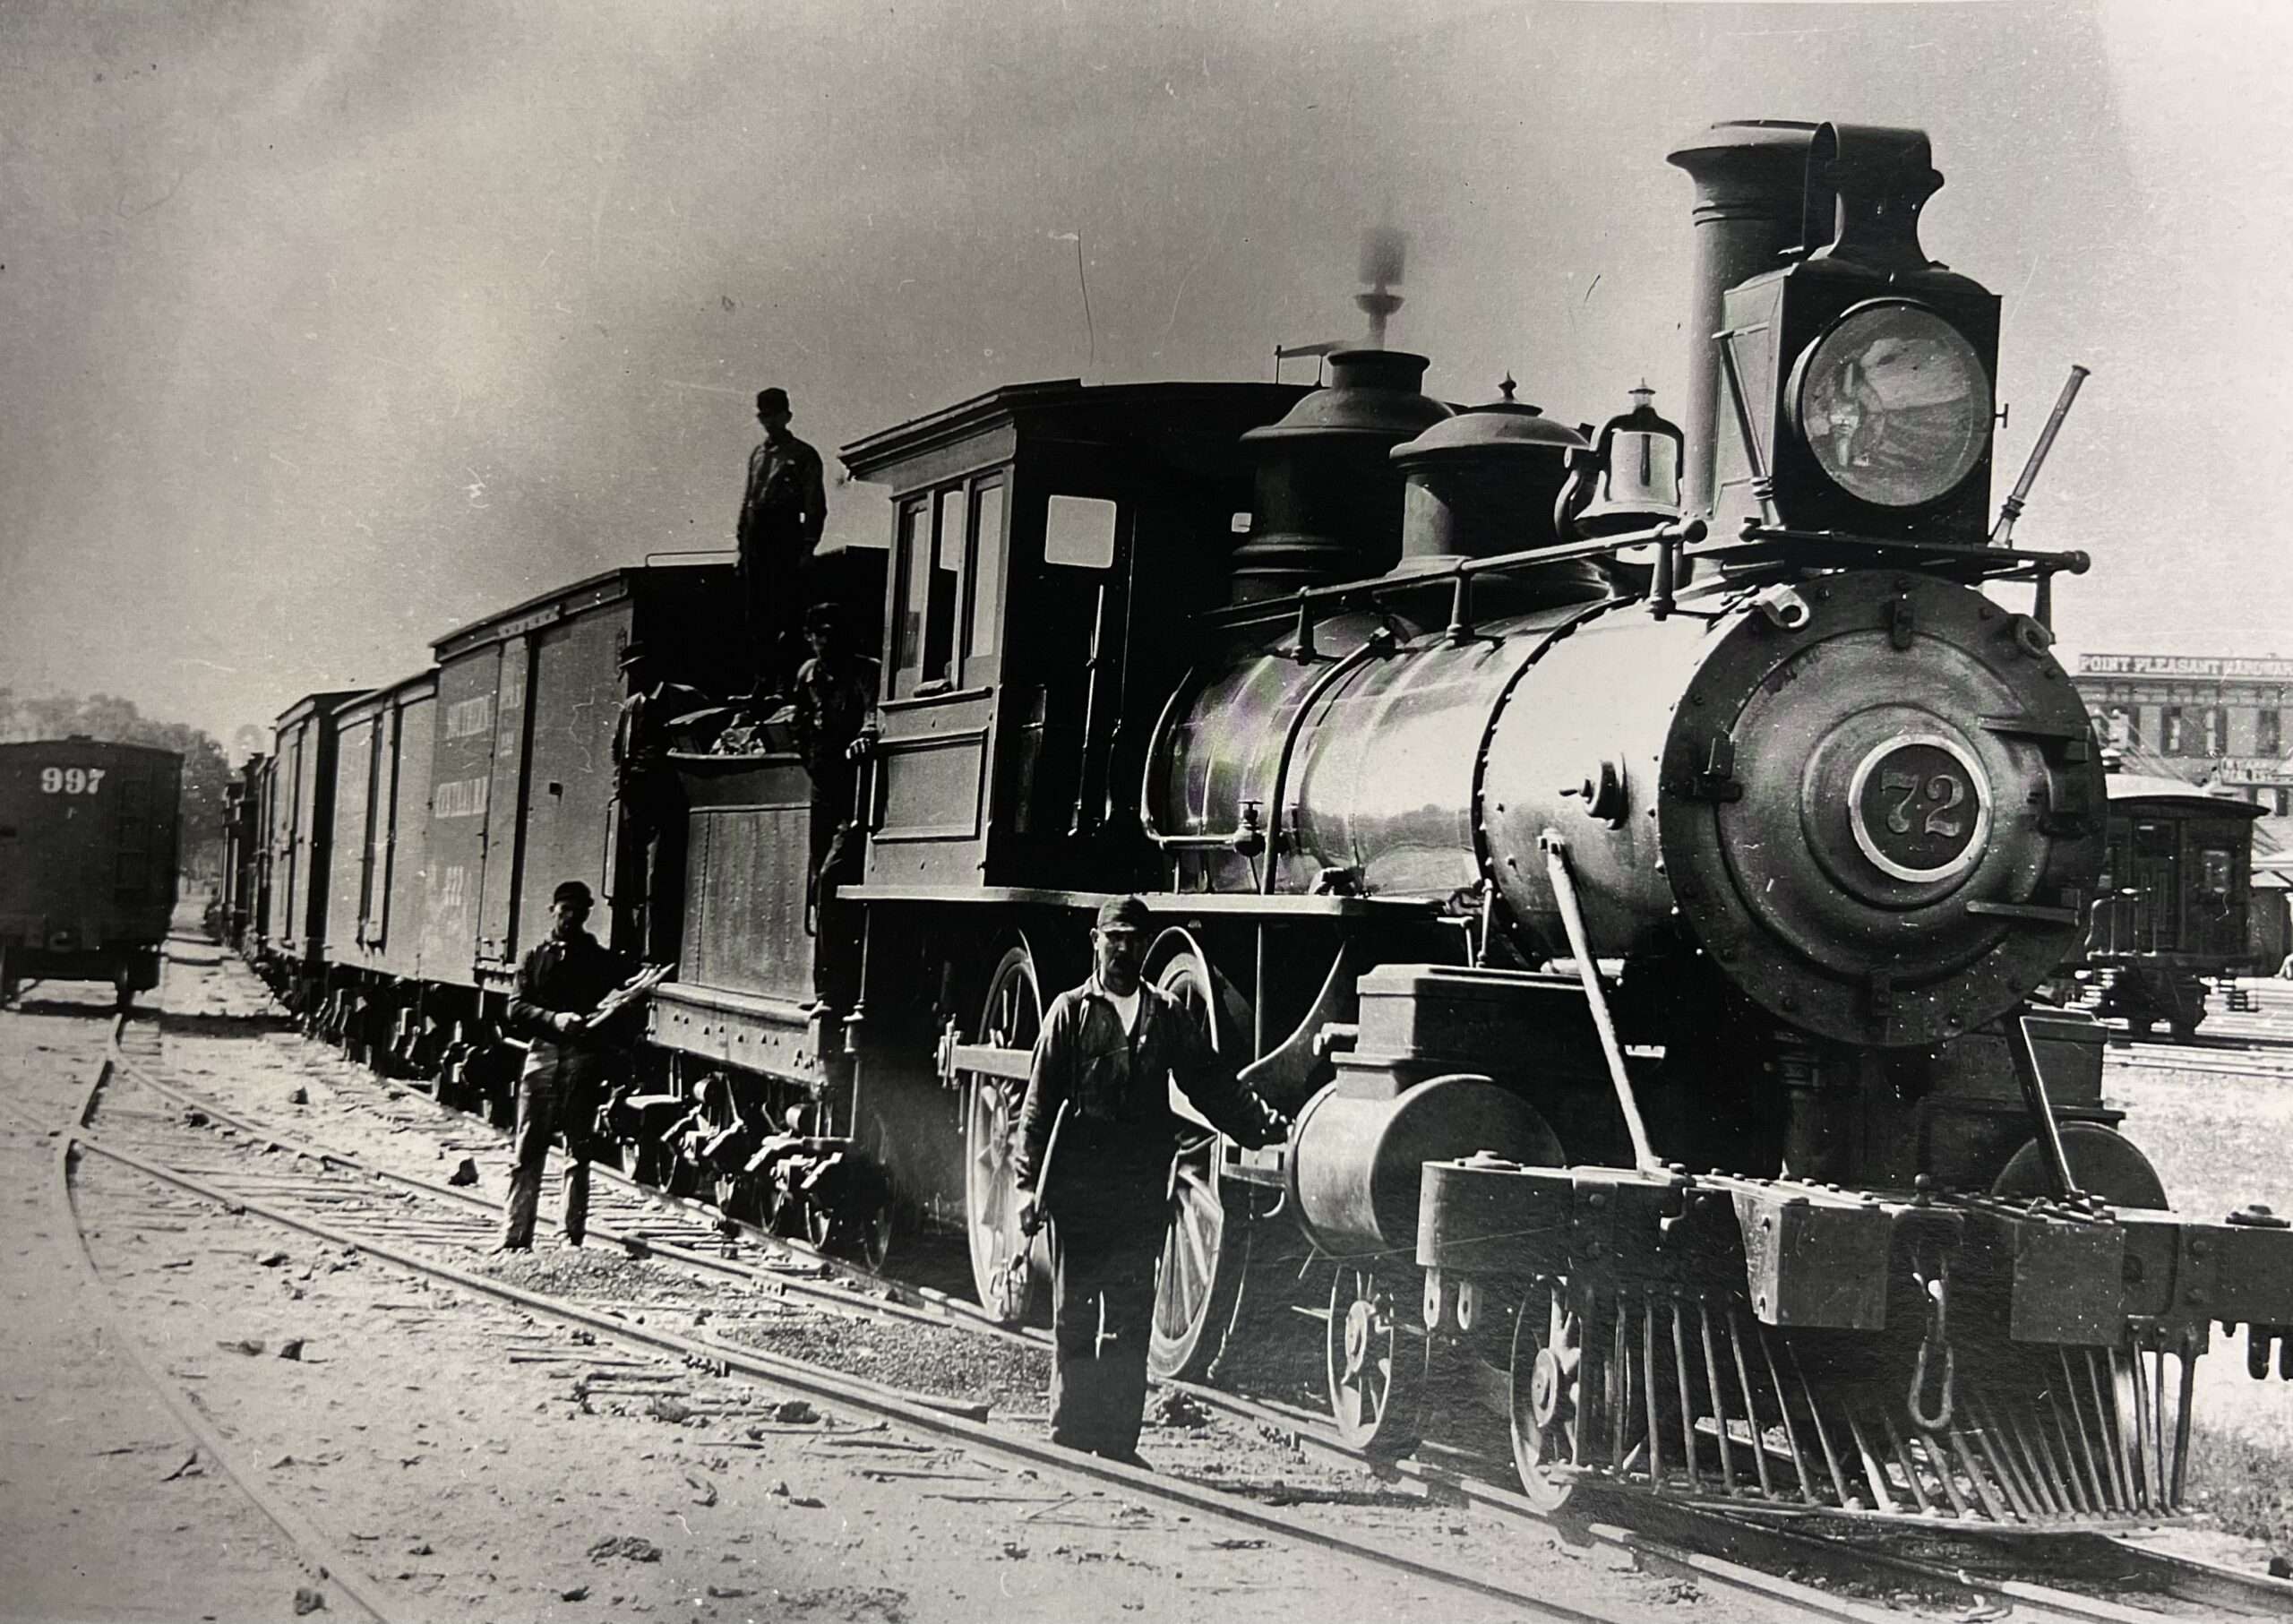 Steam Locomotive No. 72 and Point Pleasant Hardware in the background circa 1885-1890